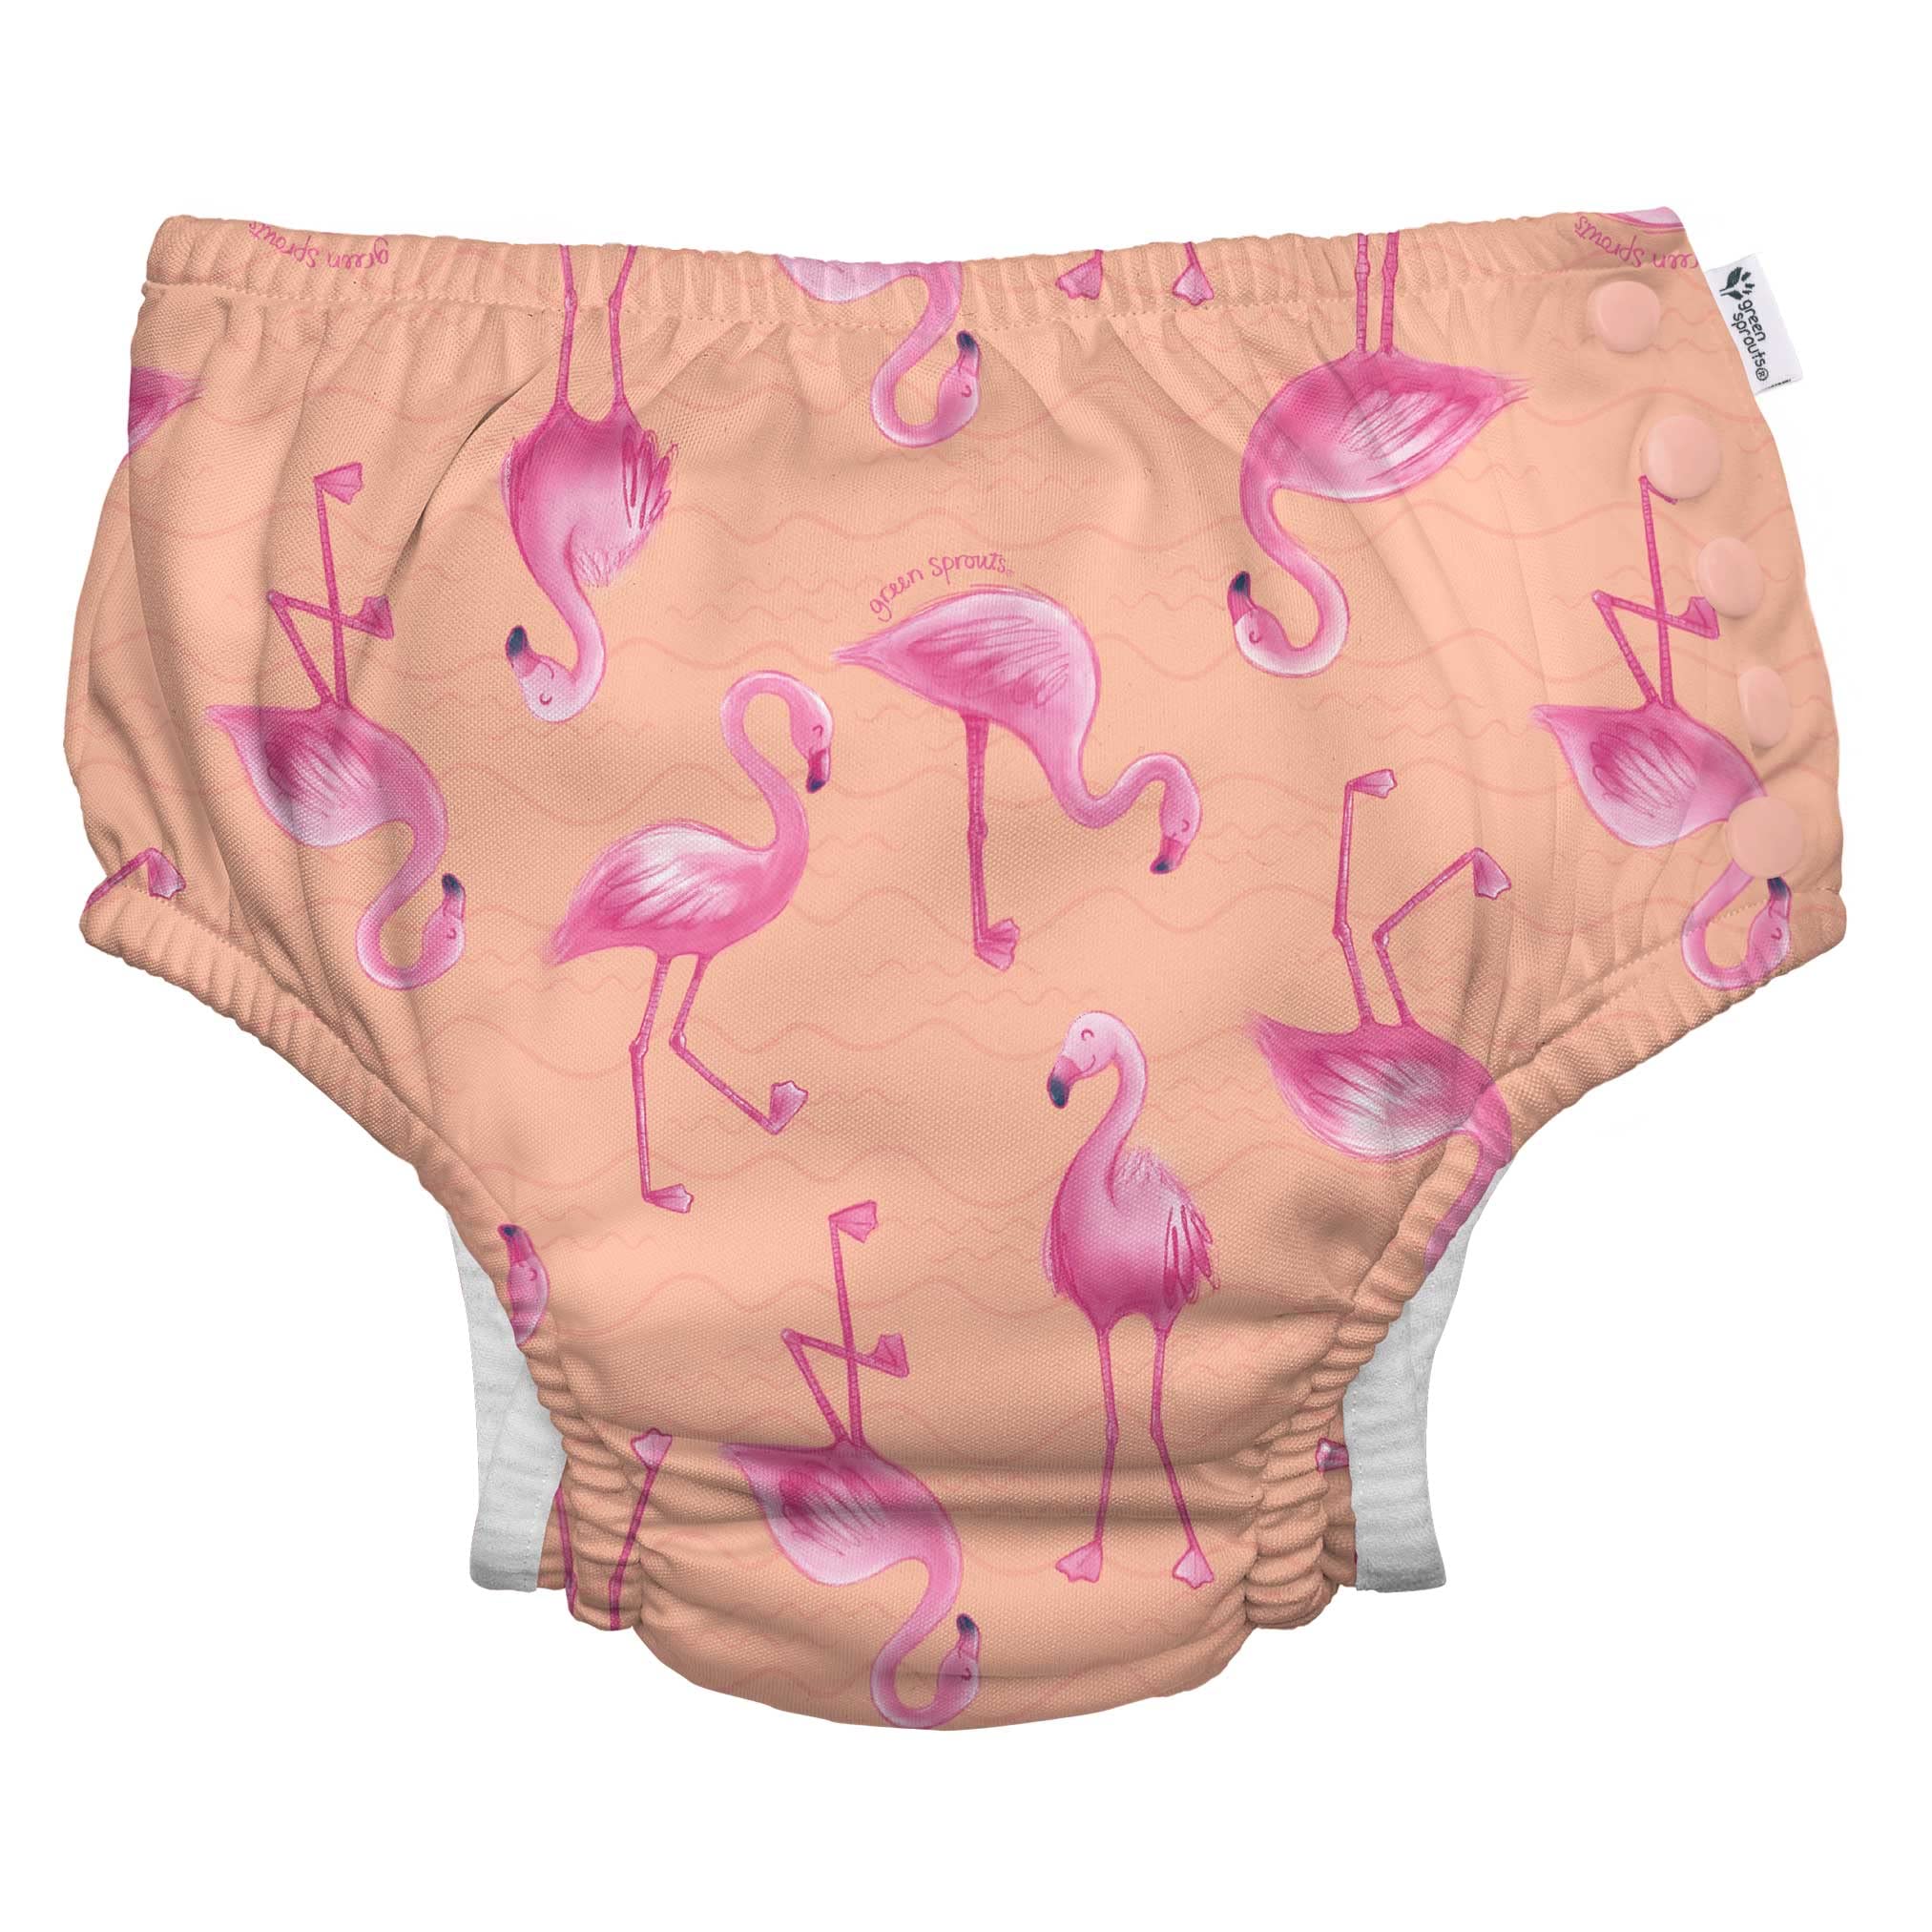 i play. by green sprouts Reusable, Eco Snap Swim Diaper with Gussets, UPF 50, Patented Design, STANDARD 100 by OEKO-TEX Certified - Coral Flamingos - 3T